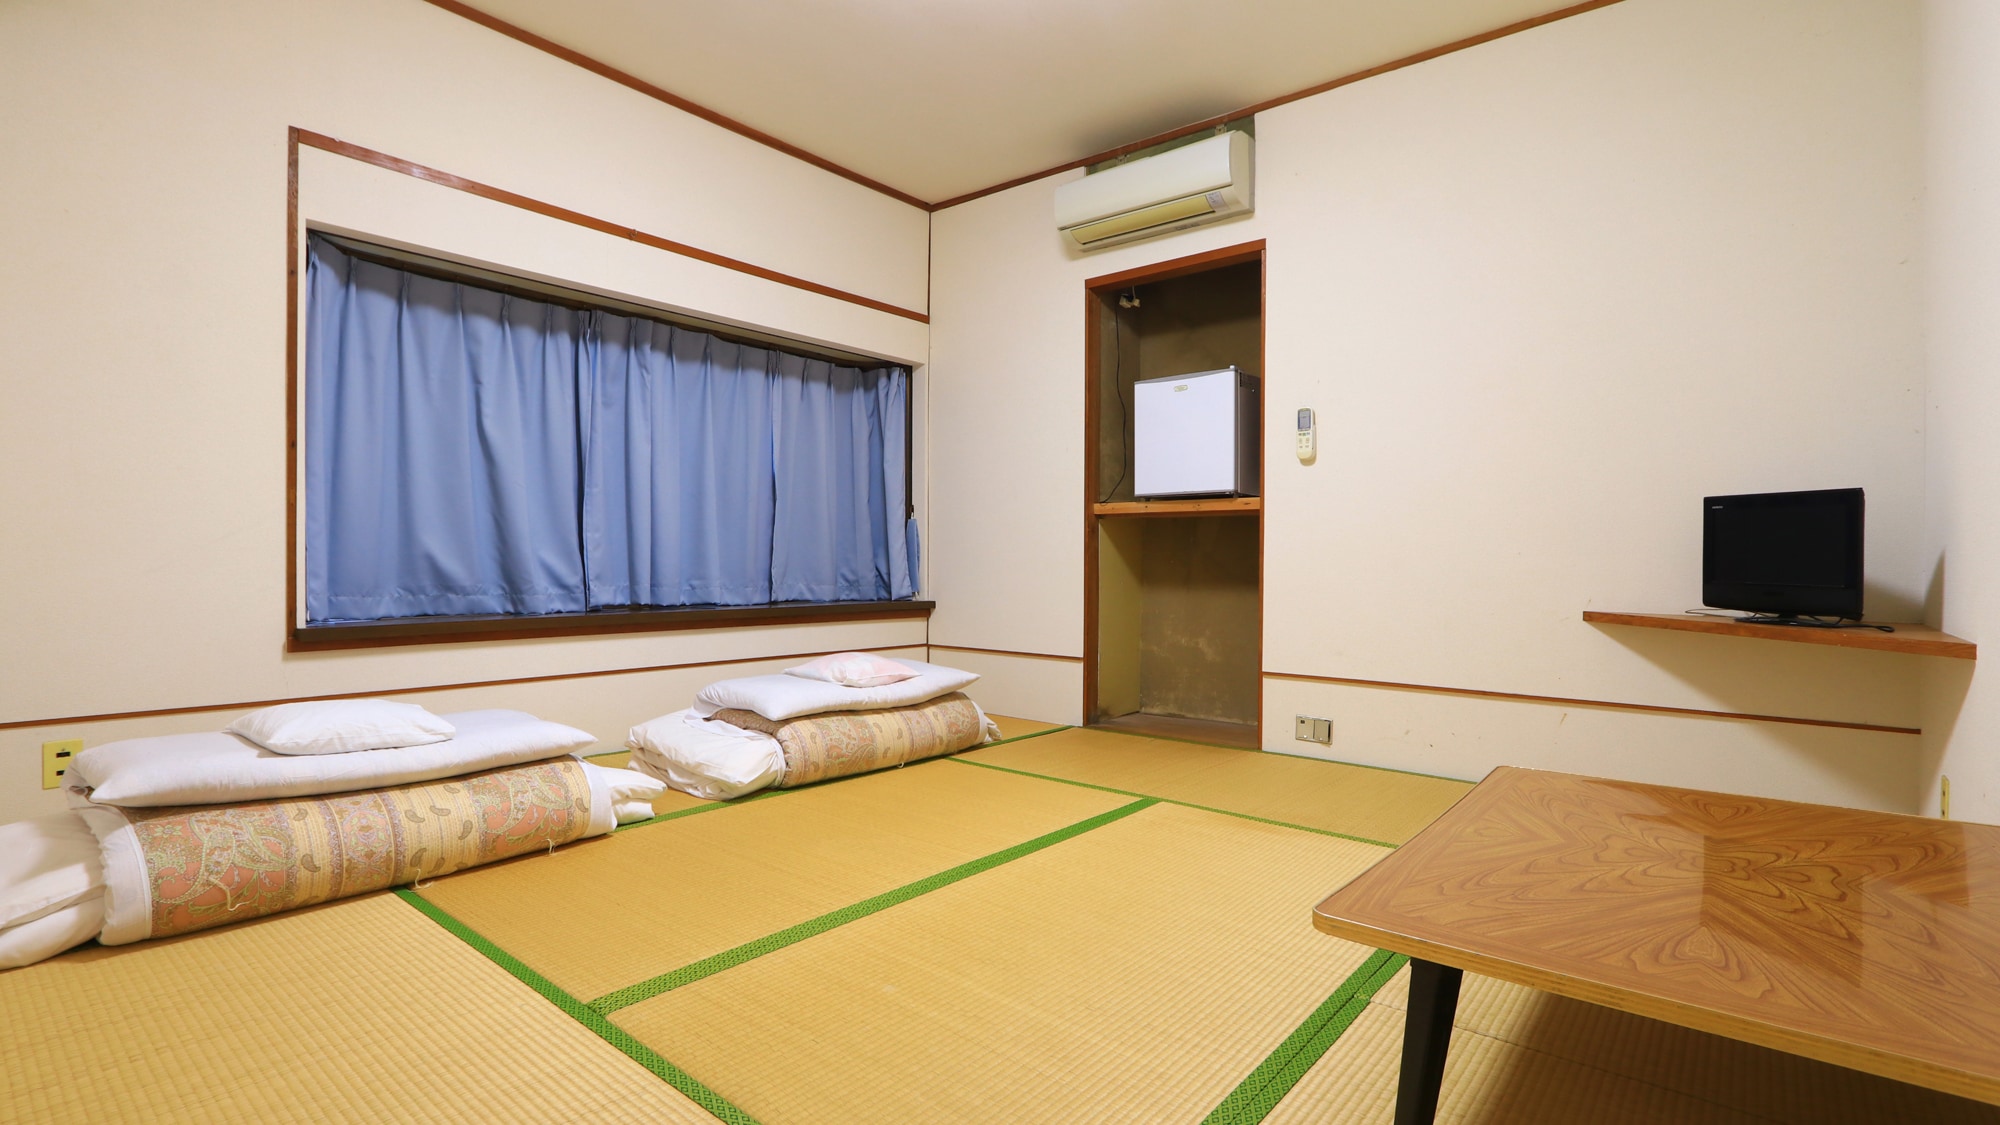 [Room 3] Japanese style room with 8 tatami mats